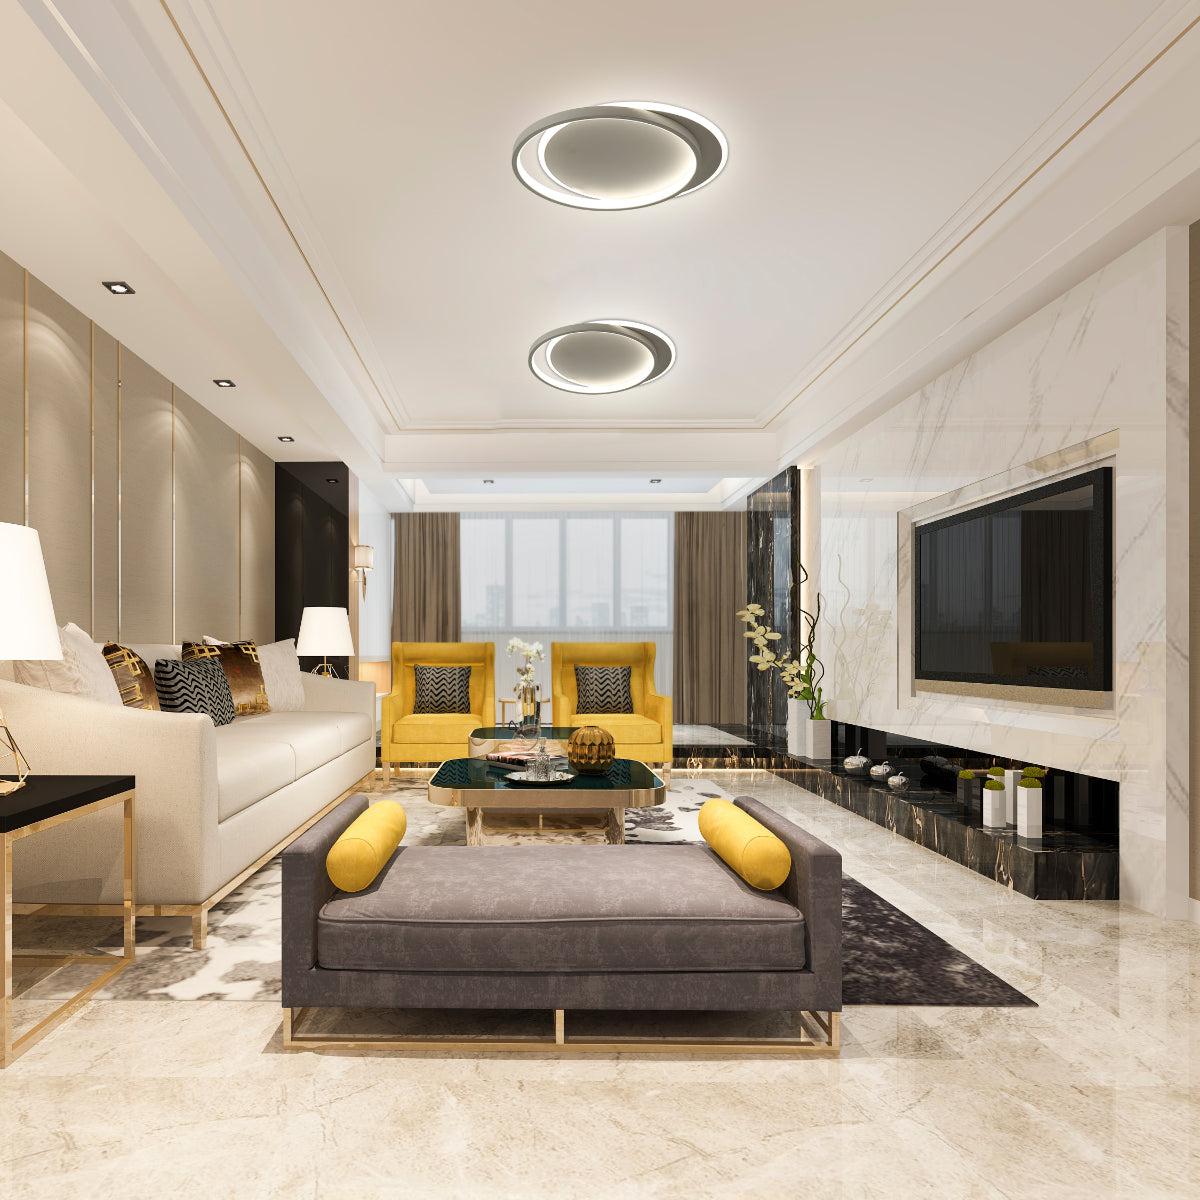 Where to use Dual-Ring LED Flush Ceiling Light 159-18101